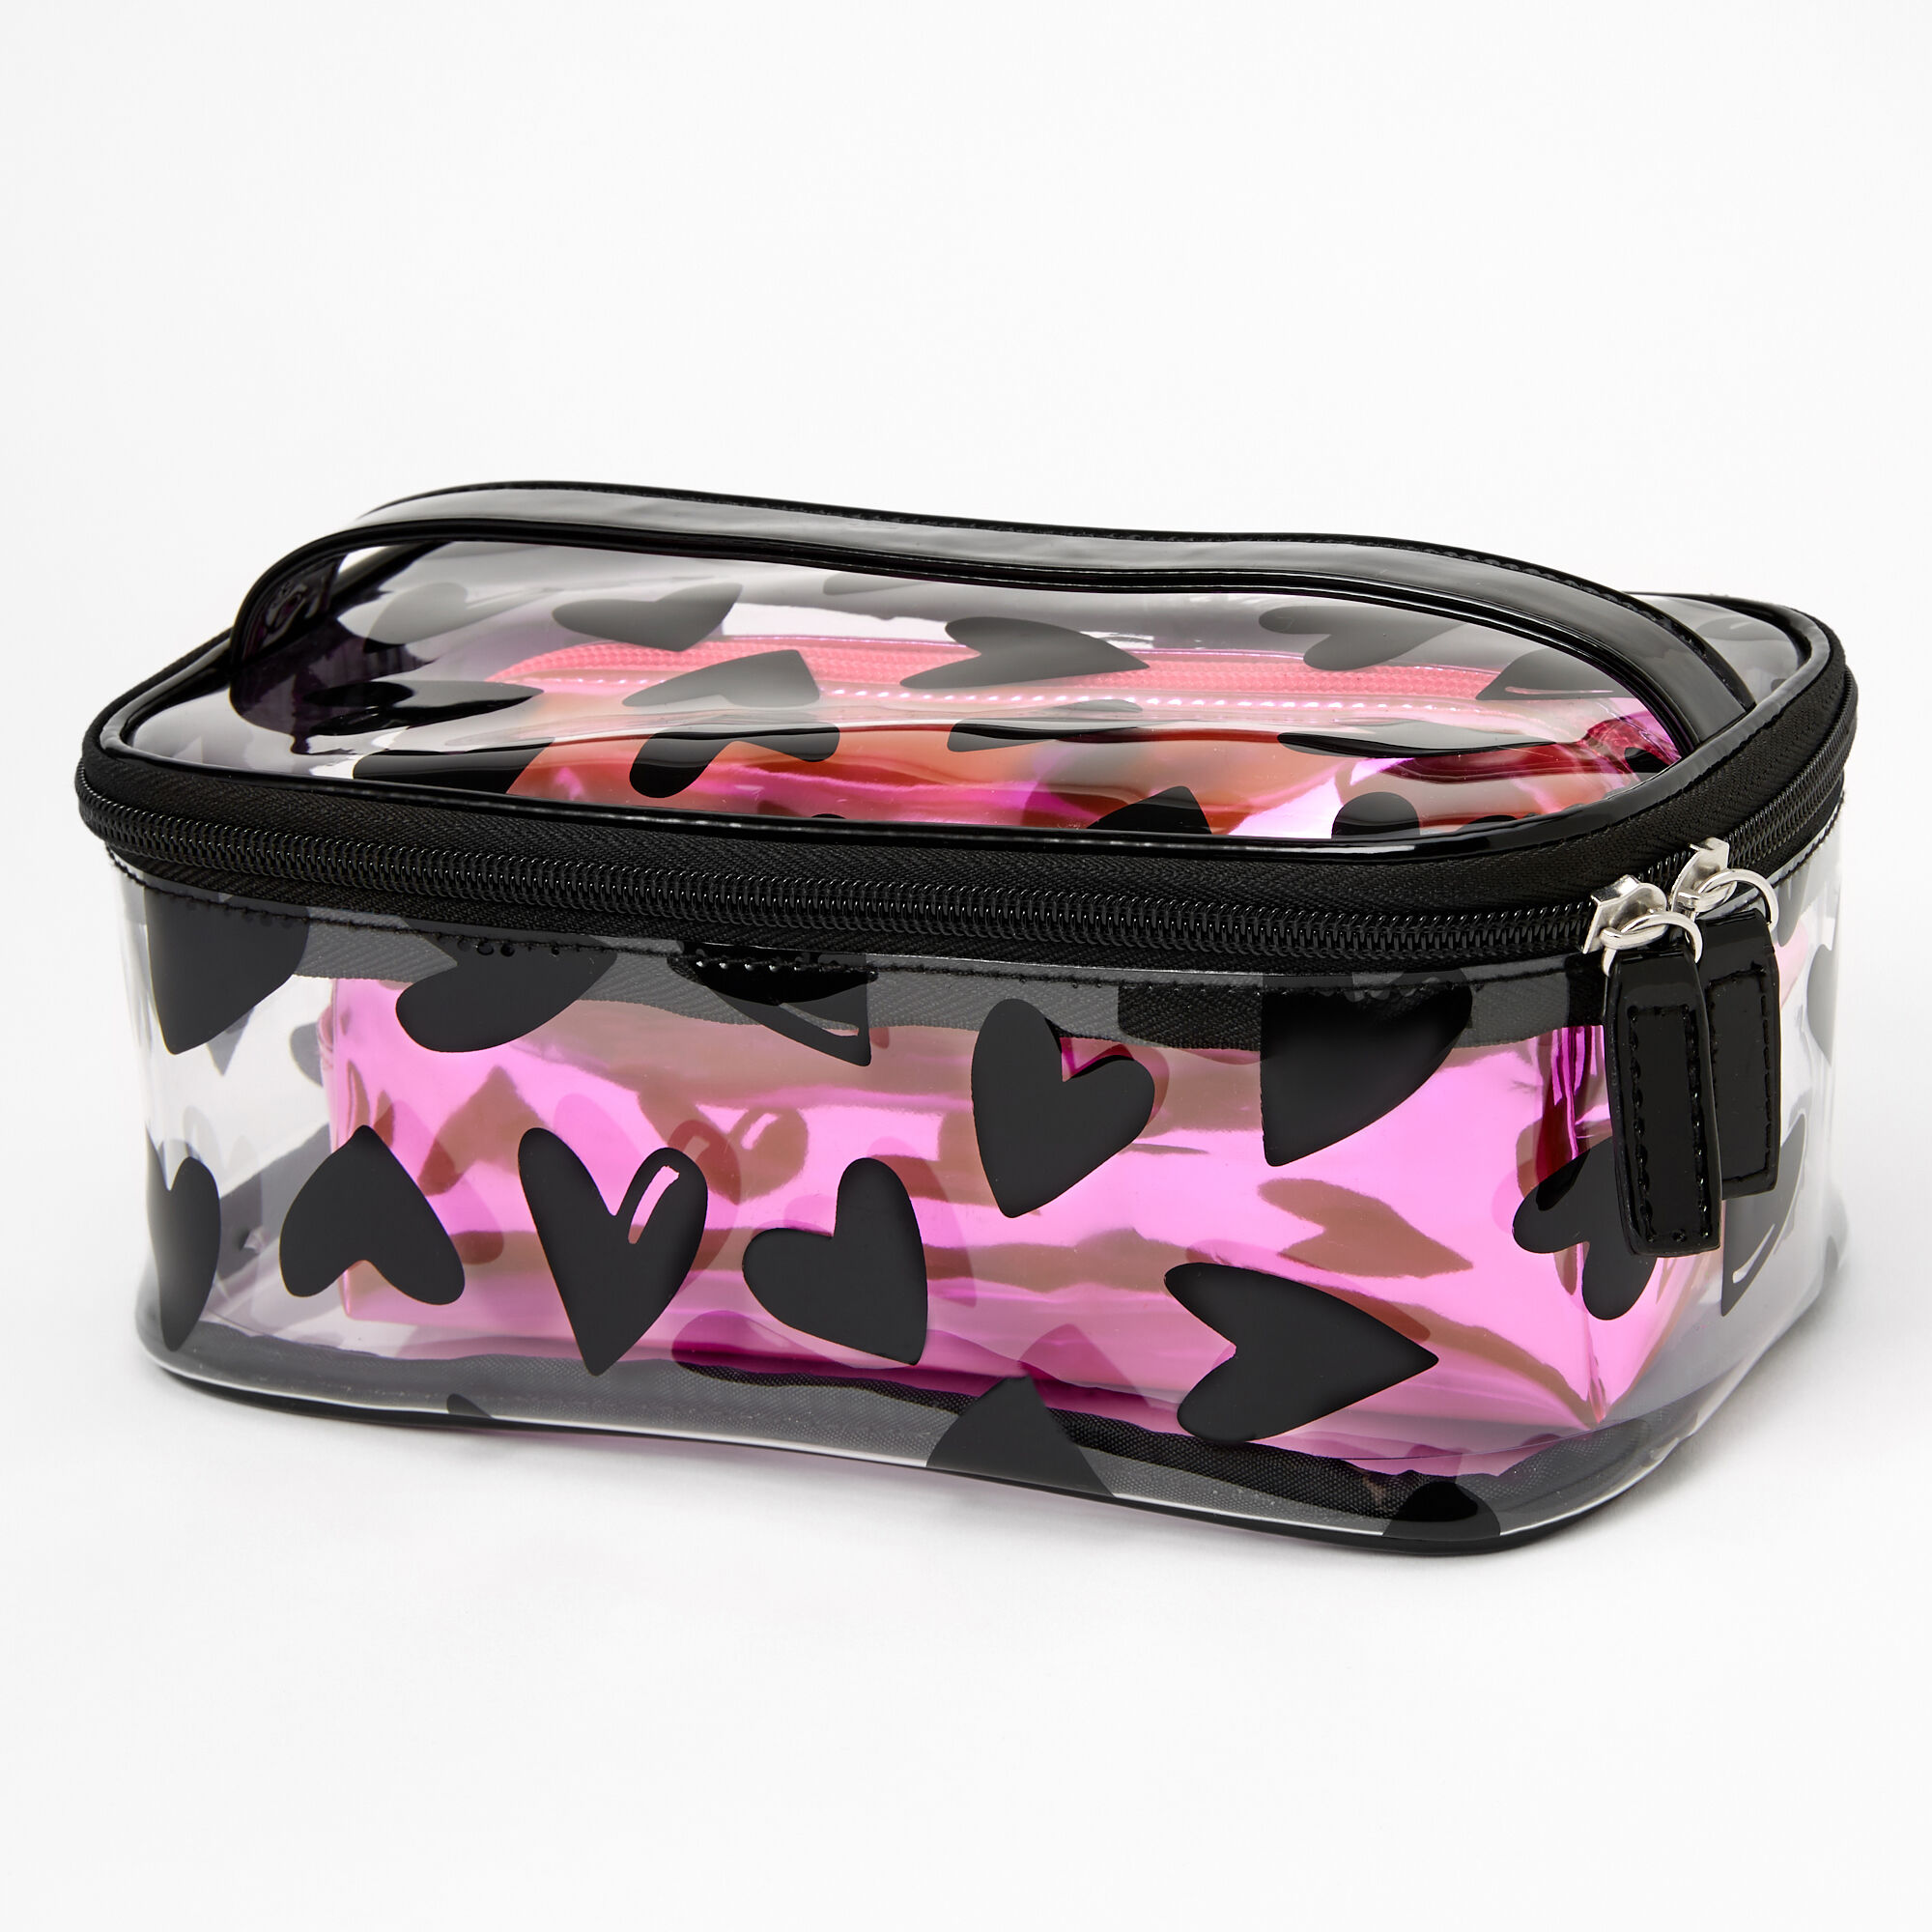 View Claires Hearts Pink Metallic 2In1 Makeup Cases 2 Pack Black information